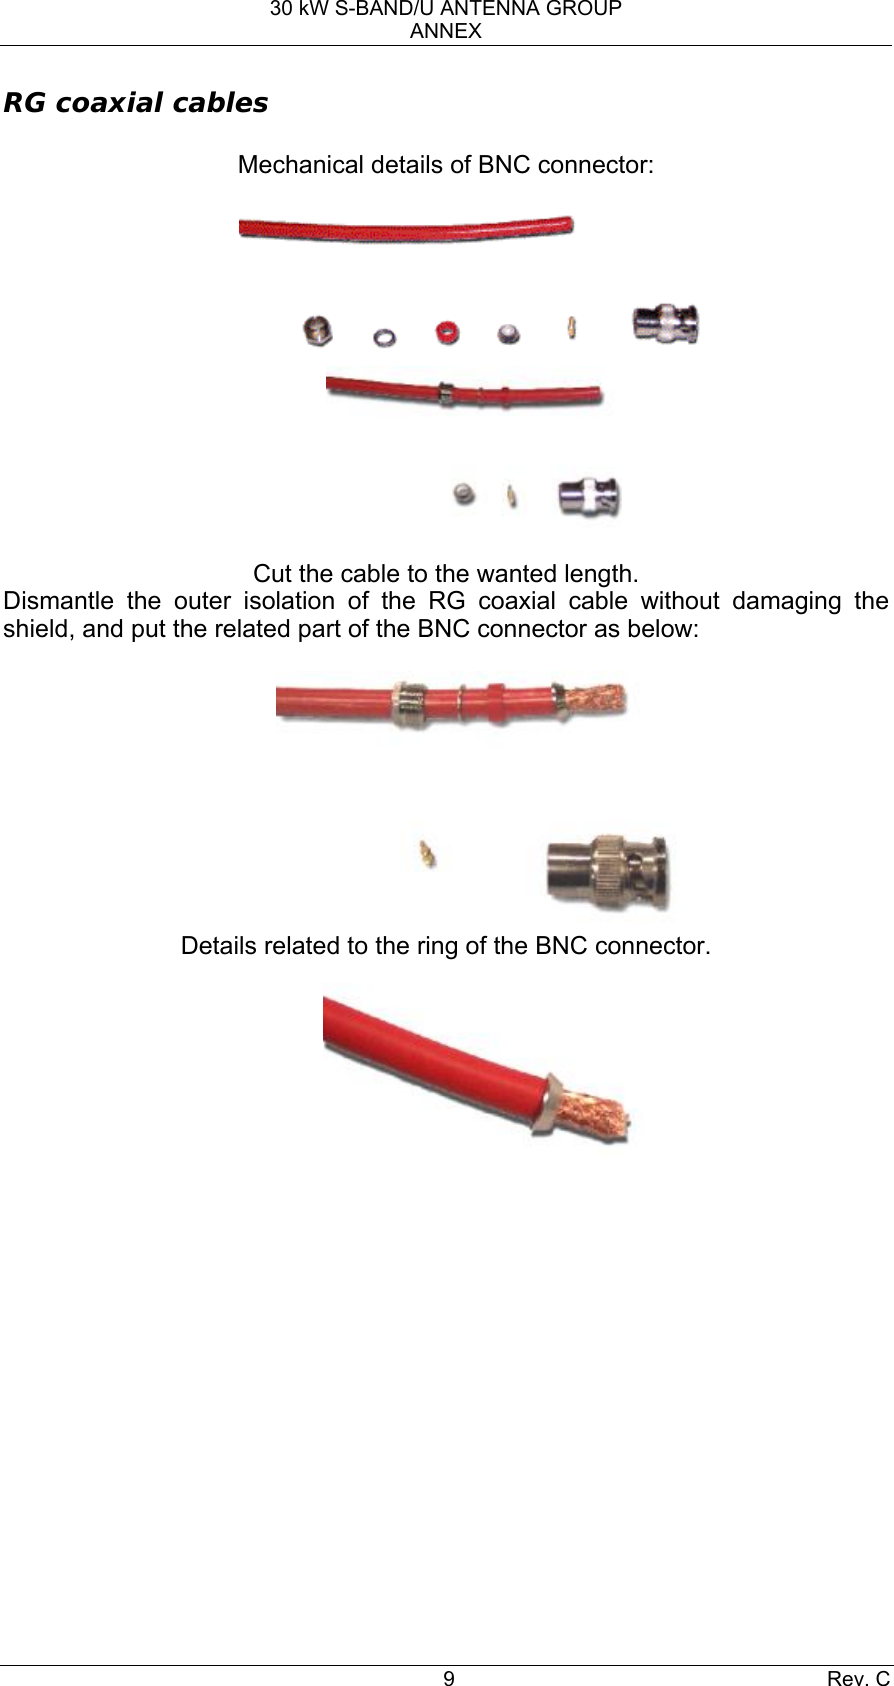 30 kW S-BAND/U ANTENNA GROUP ANNEX 9 Rev. C RG coaxial cables  Mechanical details of BNC connector:               Cut the cable to the wanted length. Dismantle the outer isolation of the RG coaxial cable without damaging the shield, and put the related part of the BNC connector as below:    Details related to the ring of the BNC connector.   